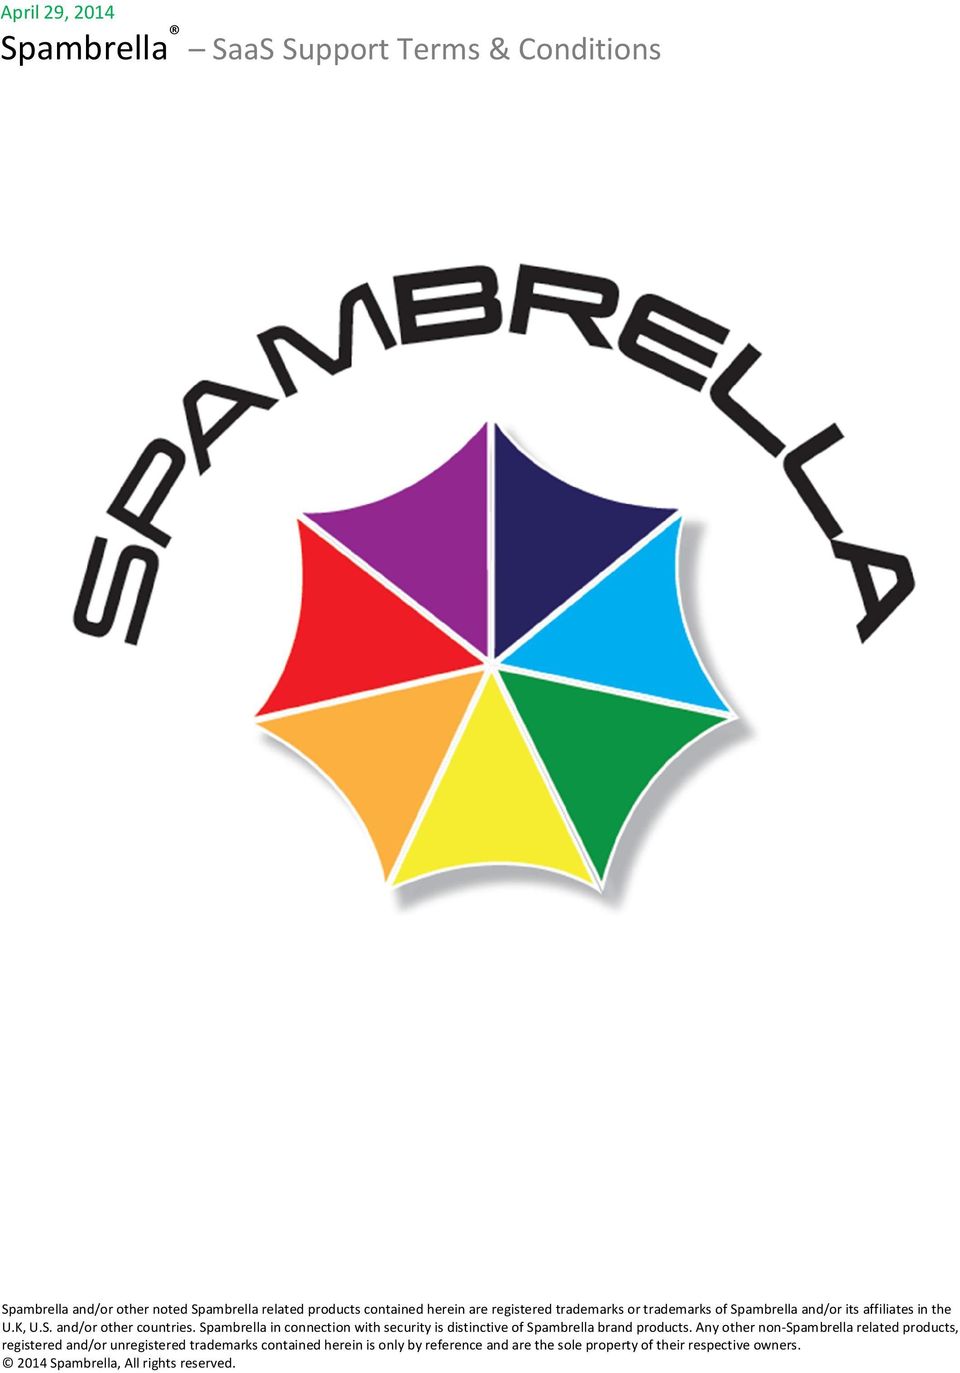 Spambrella in connection with security is distinctive of Spambrella brand products.